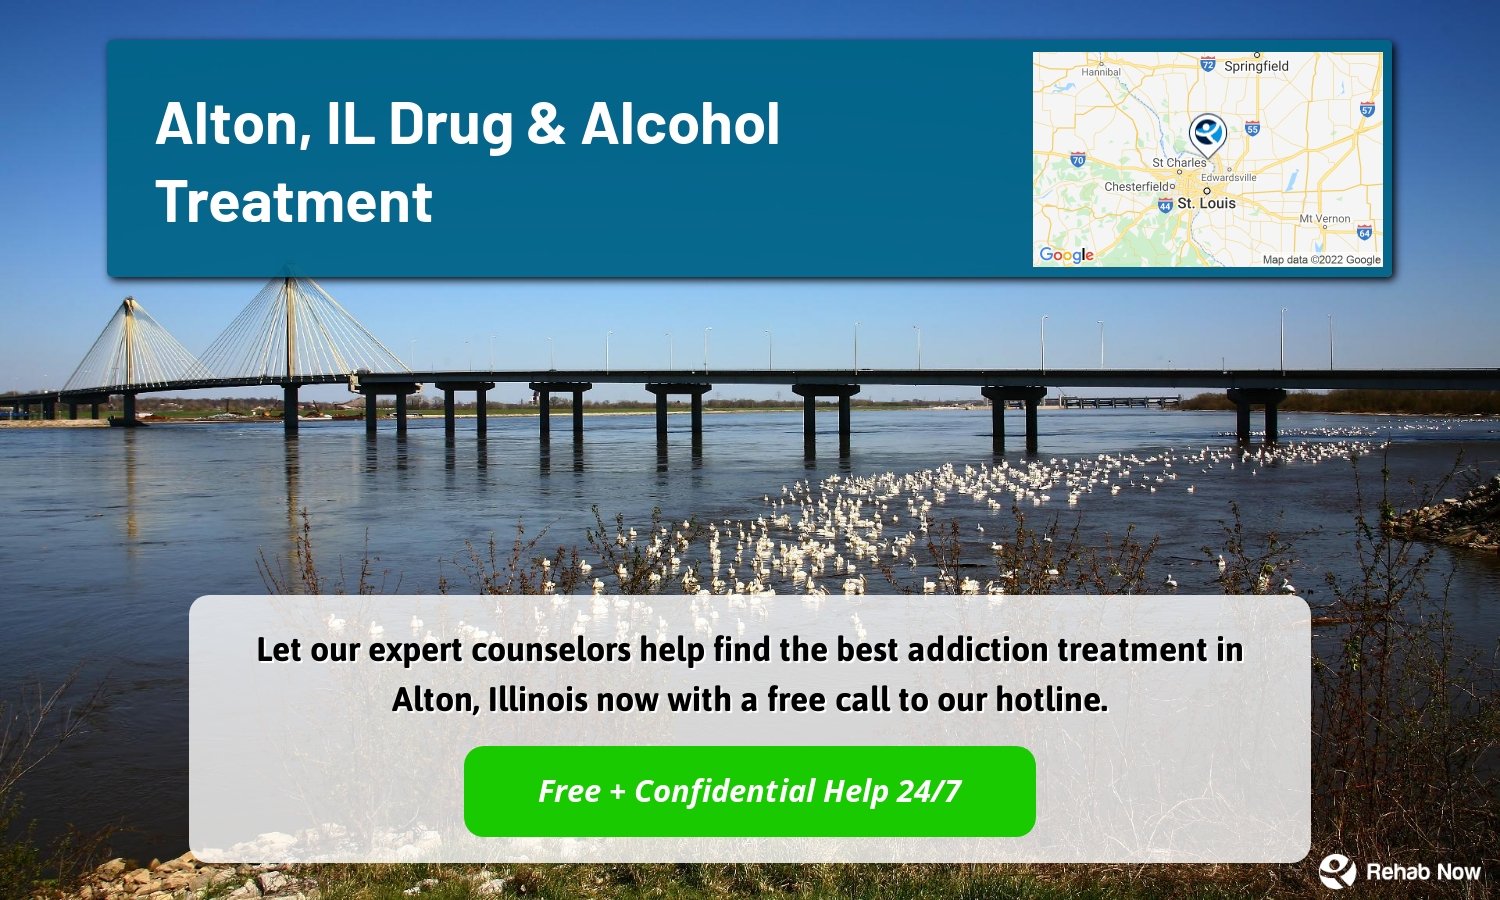 Let our expert counselors help find the best addiction treatment in Alton, Illinois now with a free call to our hotline.